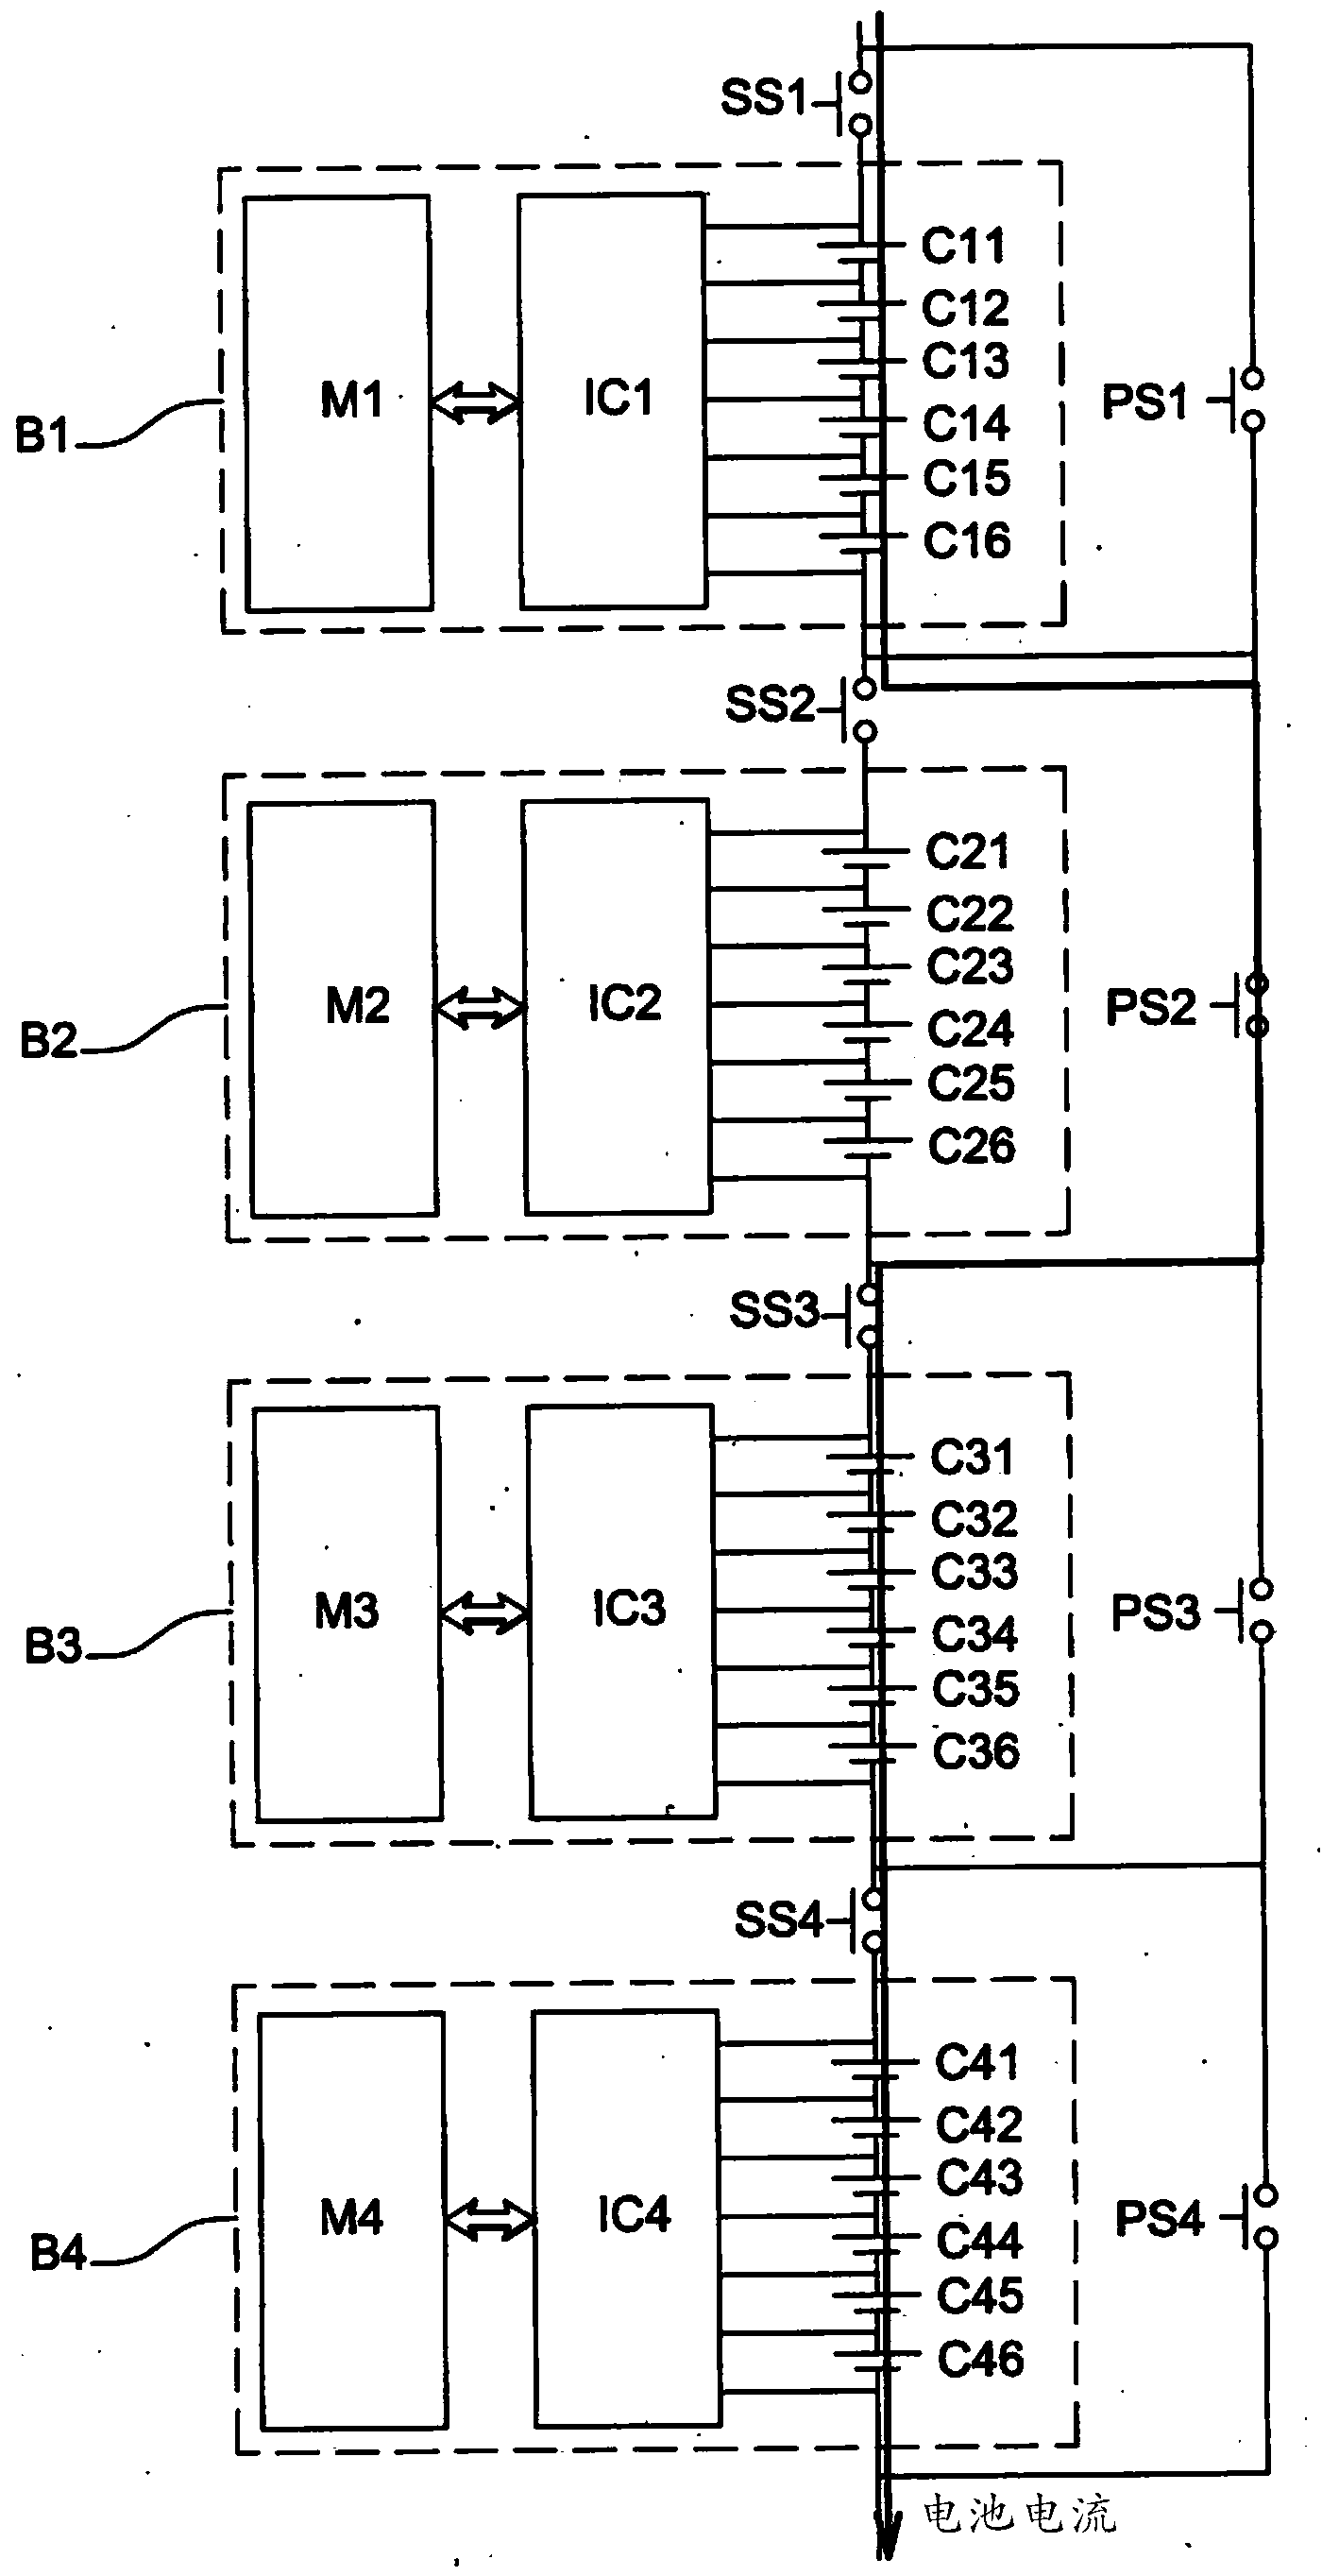 Method for balancing the charge and discharge level of a battery by switching its blocks of cells